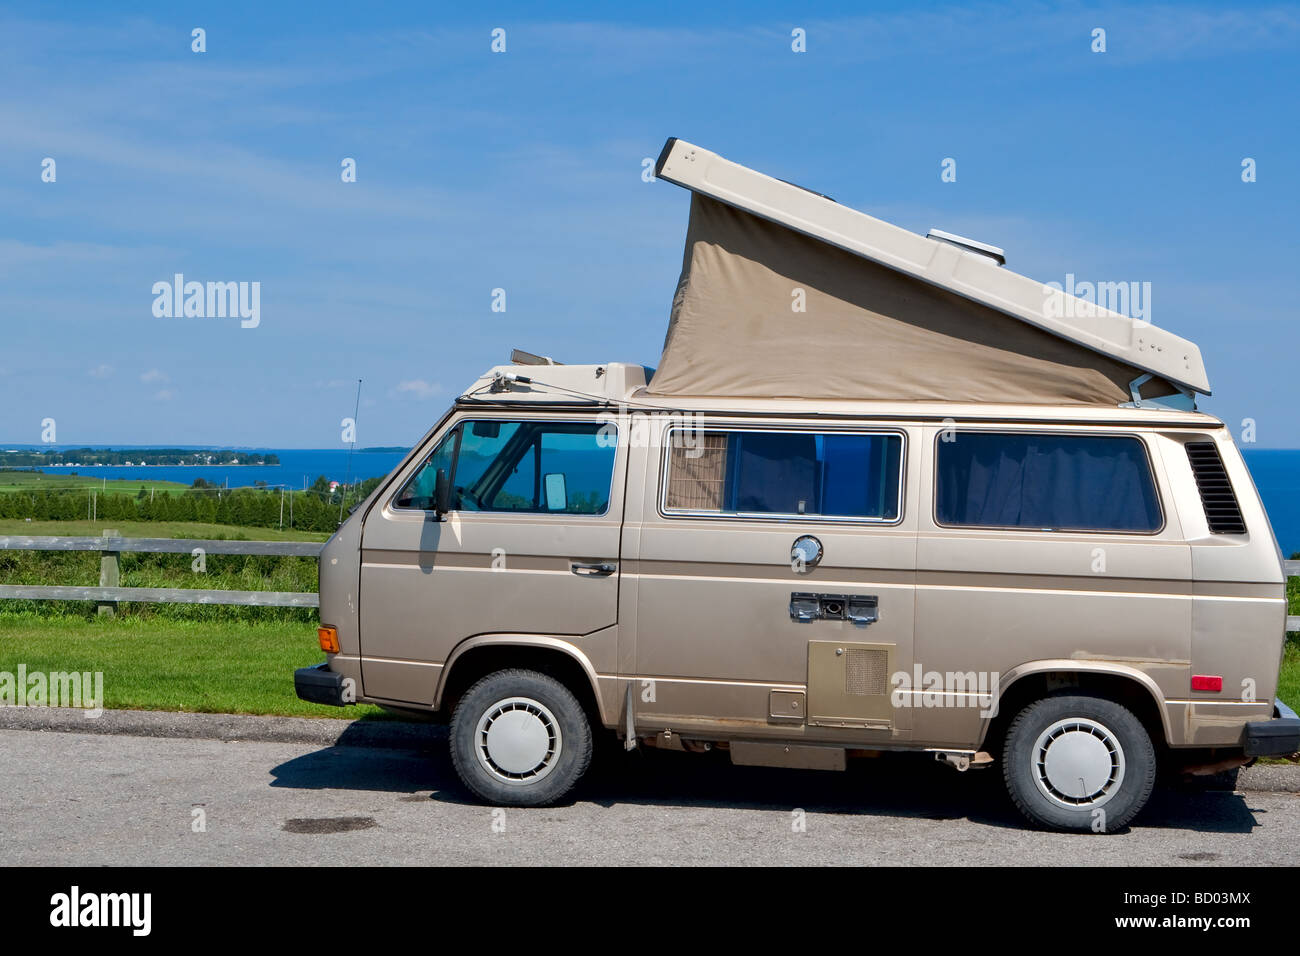 https://c8.alamy.com/comp/BD03MX/a-westfalia-with-his-pop-top-open-is-pictured-against-the-lac-st-jean-BD03MX.jpg